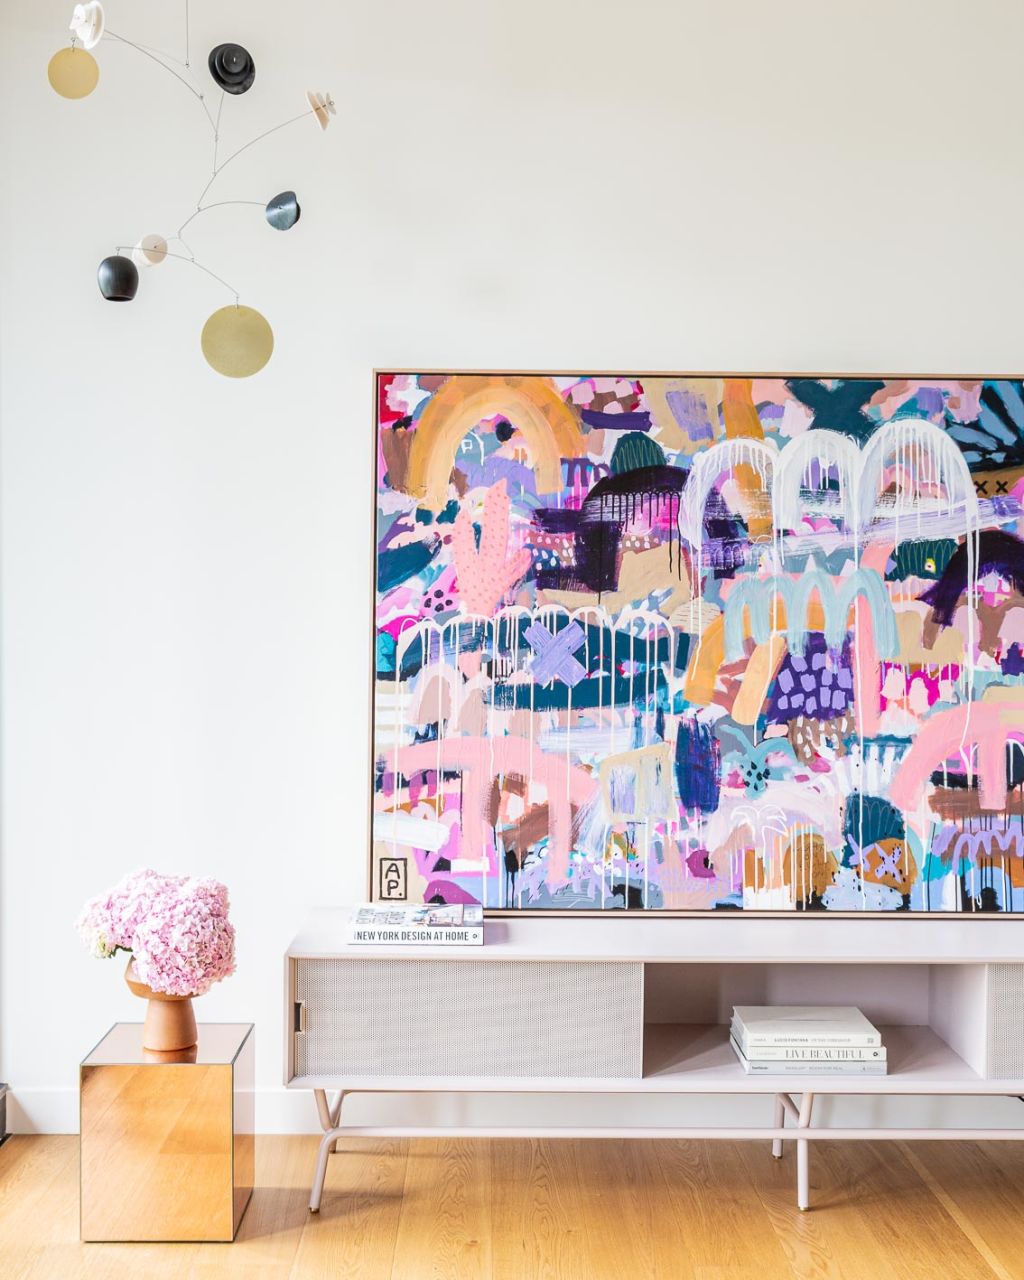 The bold artwork by Australian artist Anna Price takes pride of place in the living room. Photo: Chloe Lambert